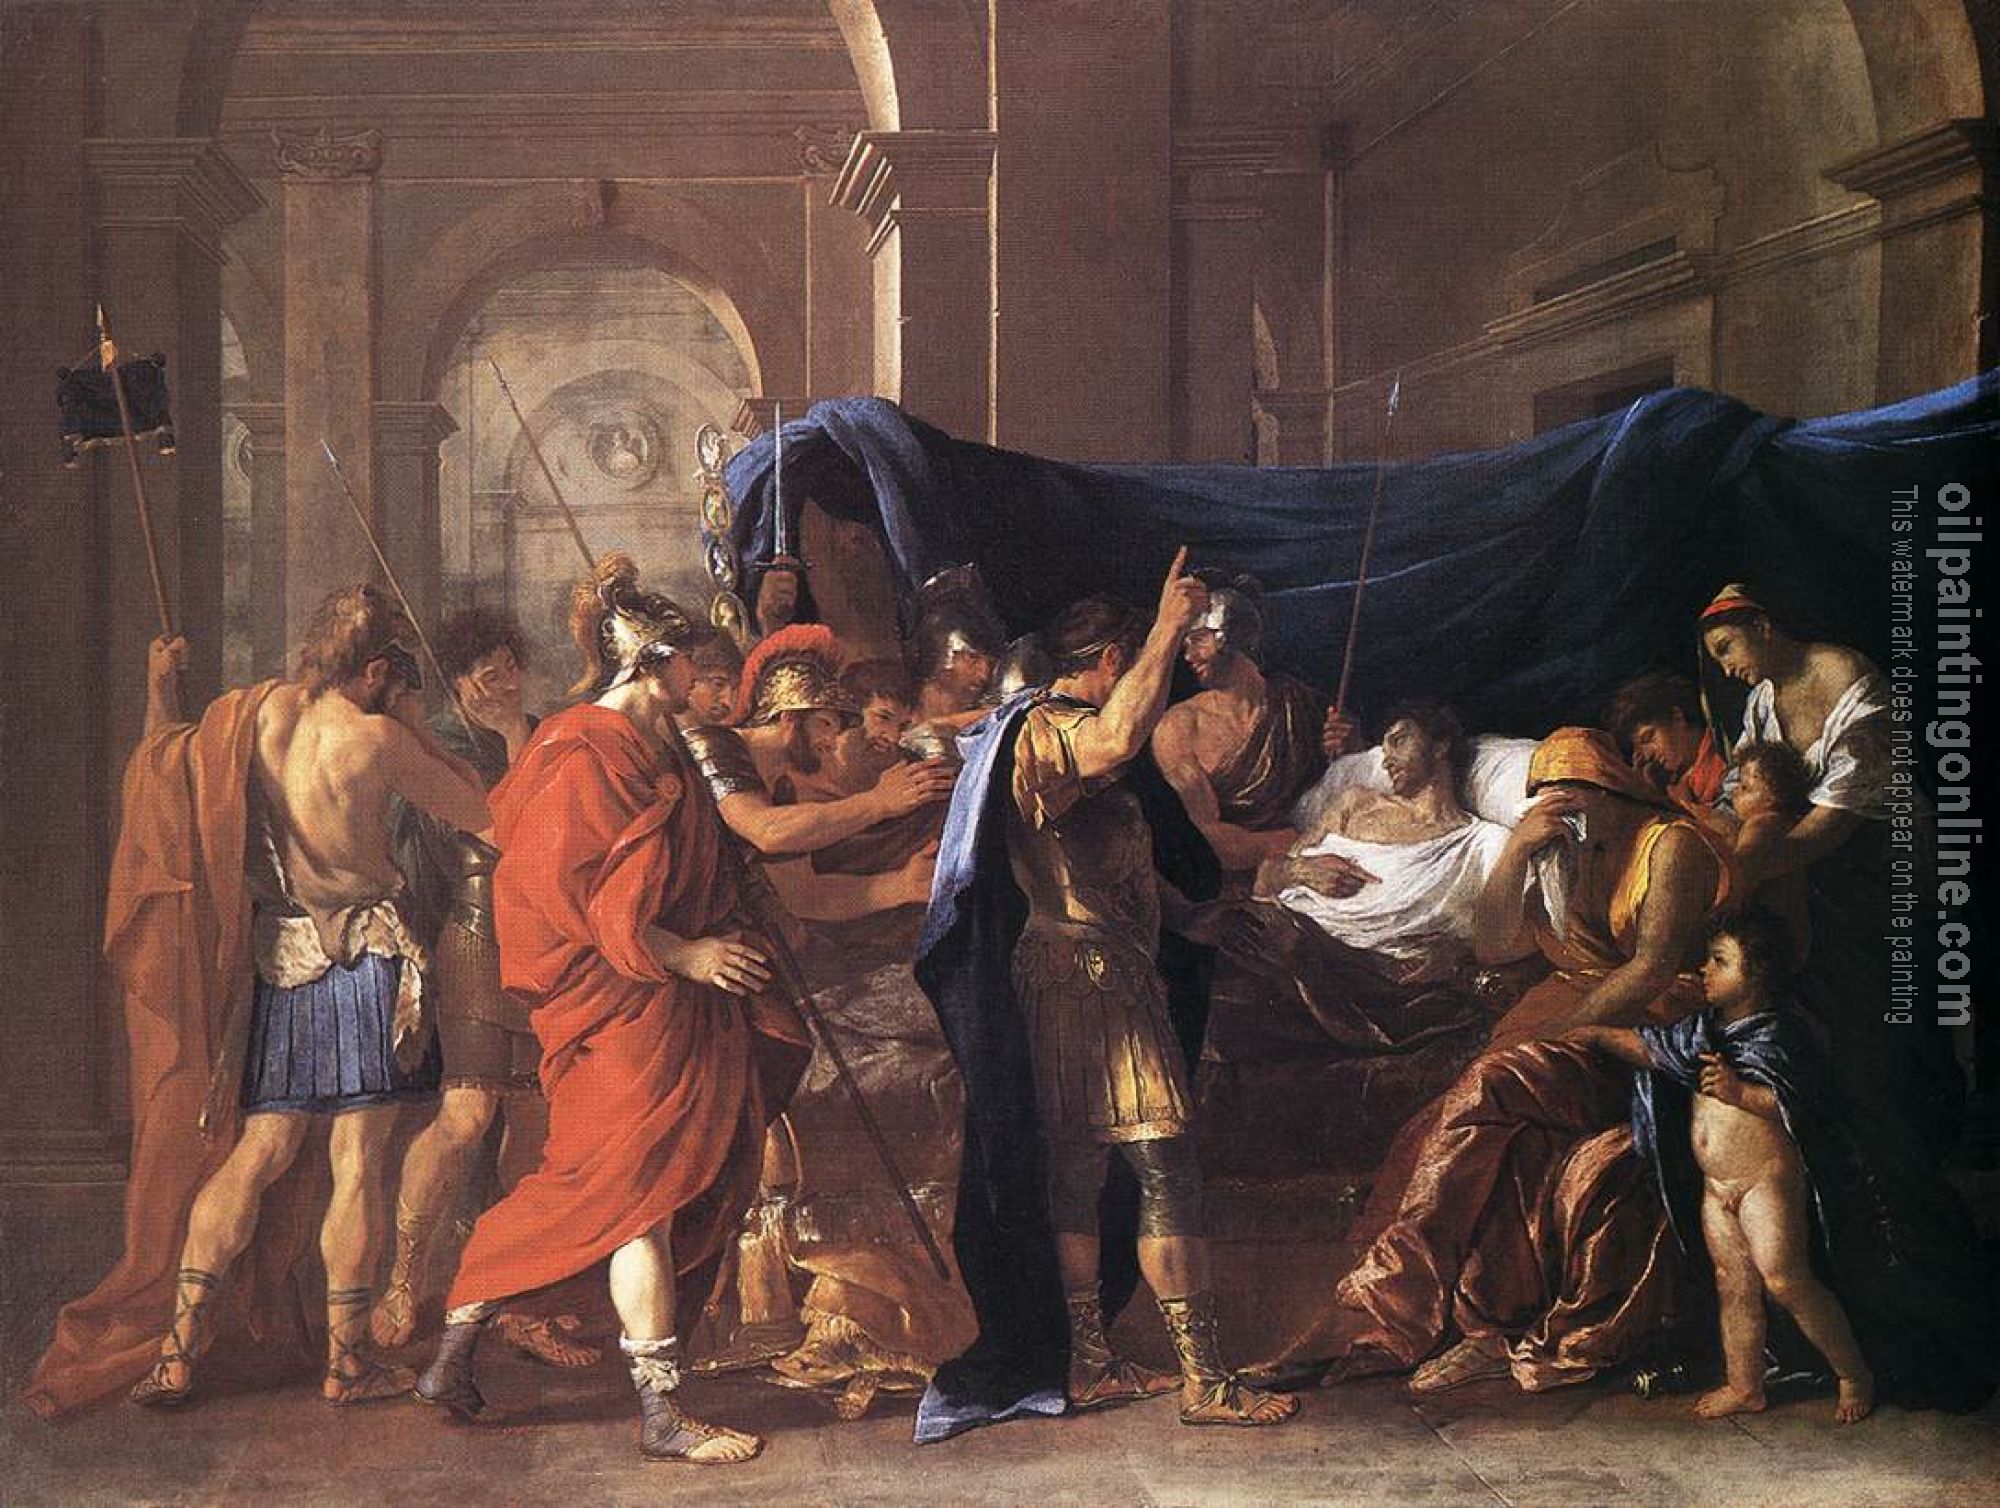 Poussin, Nicolas - The Death of Germanicus